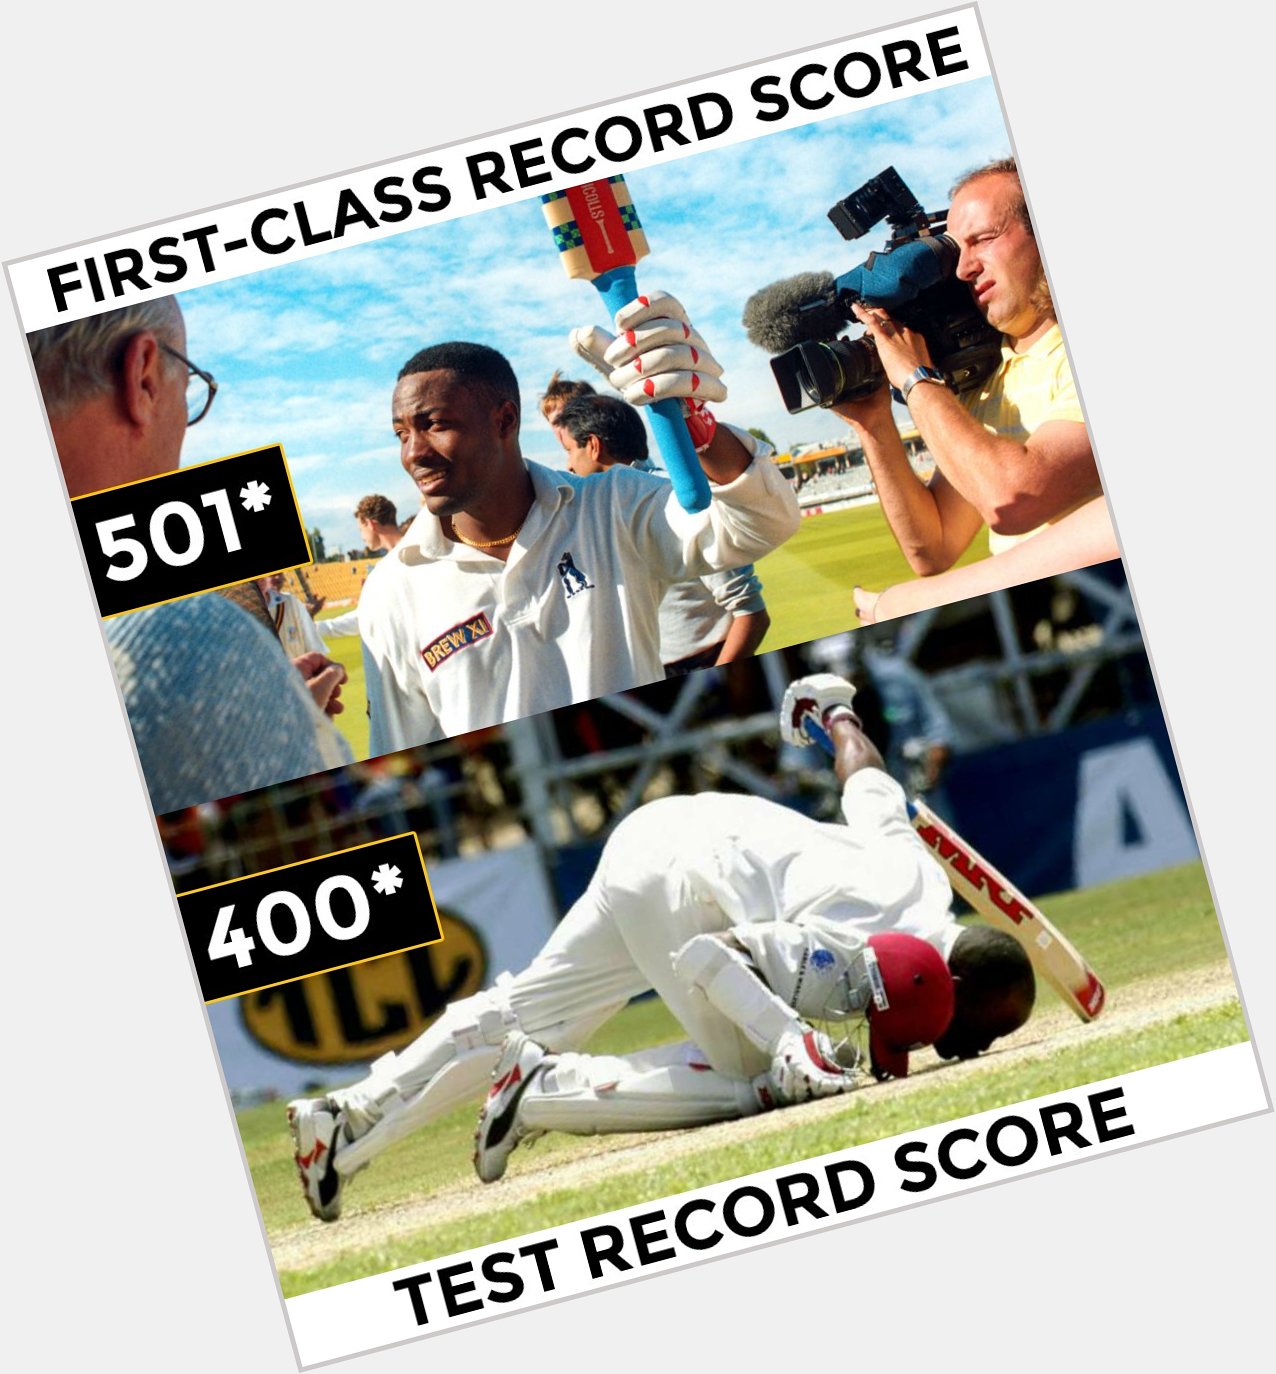 No one can ever dream of touching these records nowadays. Happy birthday to the legendary Brian Lara. 